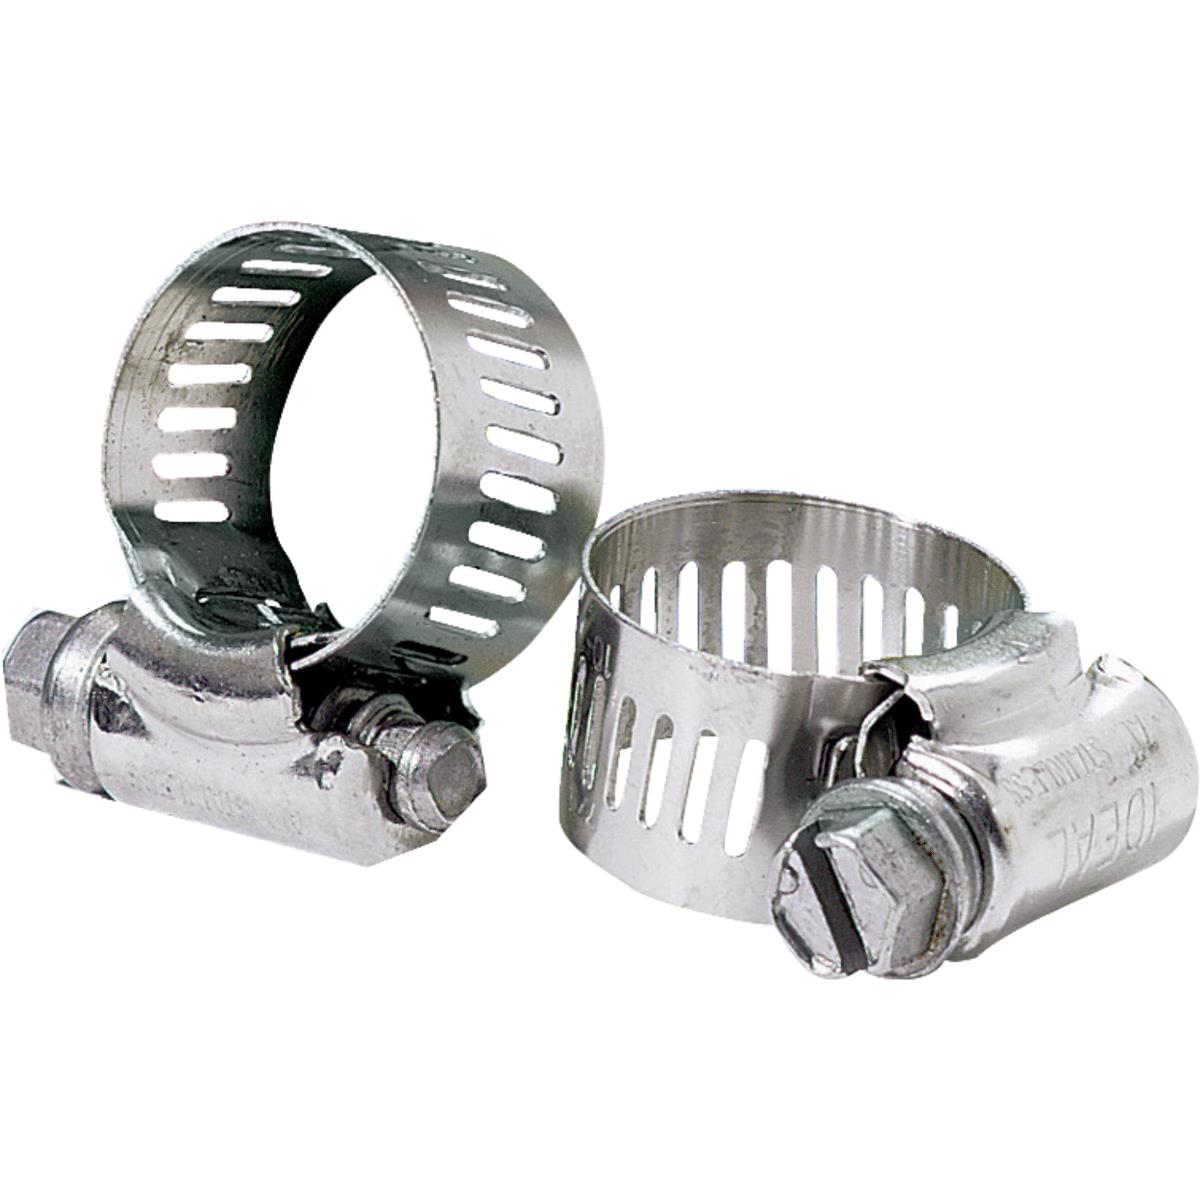 SAE 52 Hose Clamp PK10 1-3//4 to 3-3//4 In